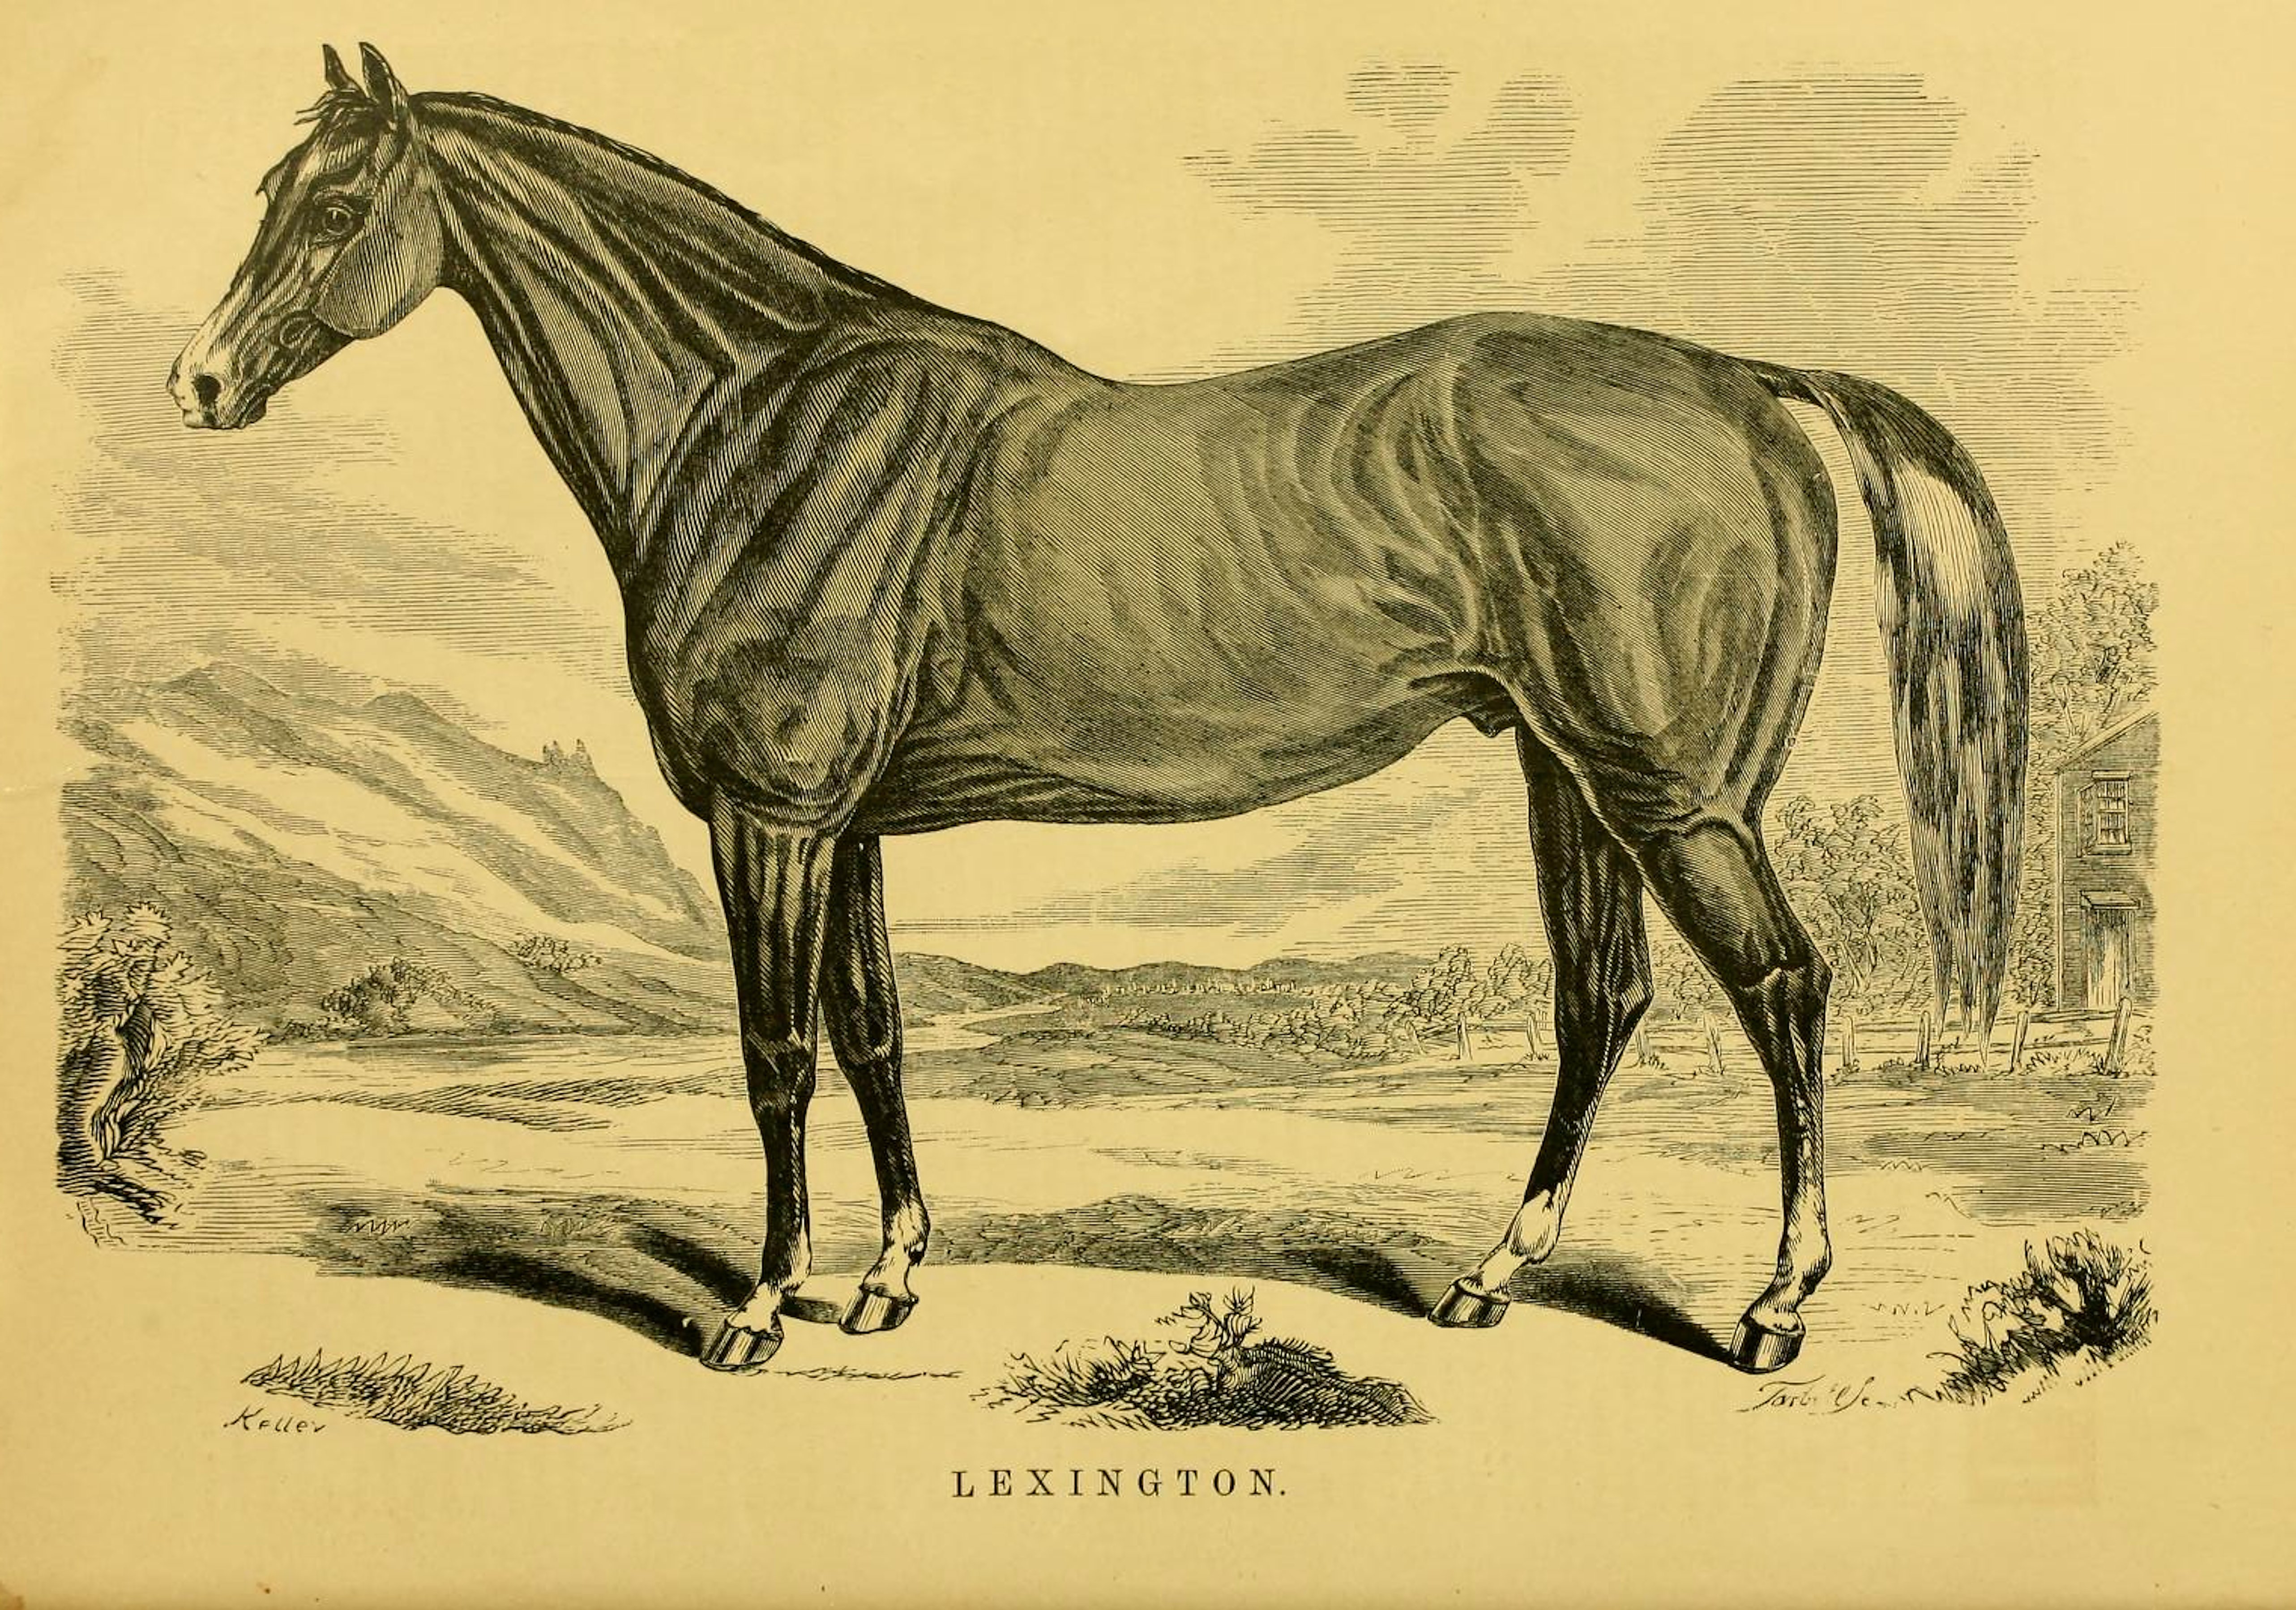 Illustration of Lexington from "Famous American Racehorses", 1877 (Museum Collection)